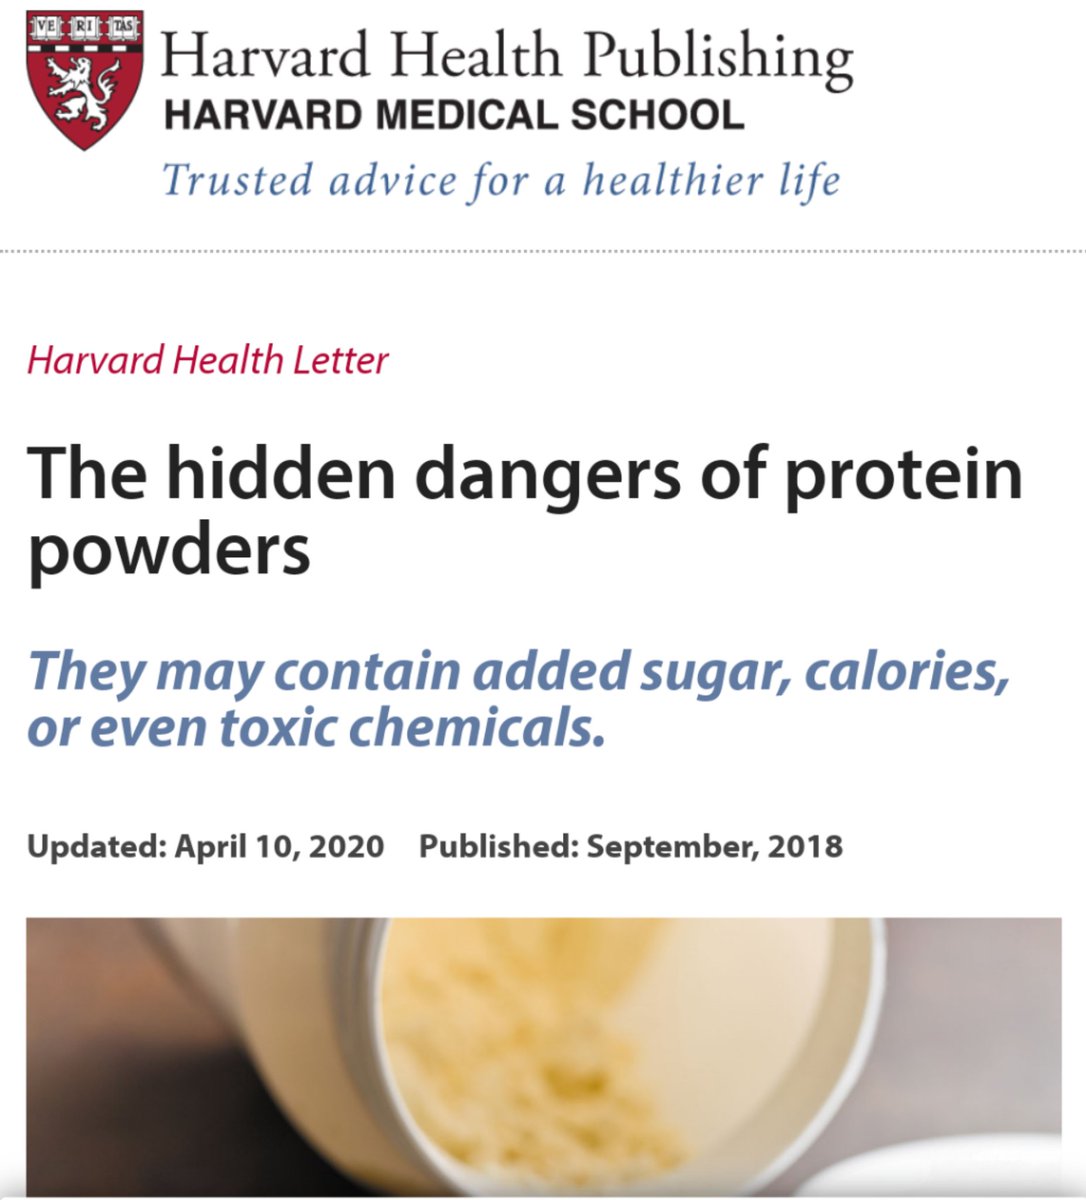 Whenever someone wants to talk shit about whey protein or protein in general, this particular link is pasted as if it's some strong piece of evidene. 1. This is an ARTICLE2. There's not a single study cited in the entire article...not expected from Harvard. 1/n